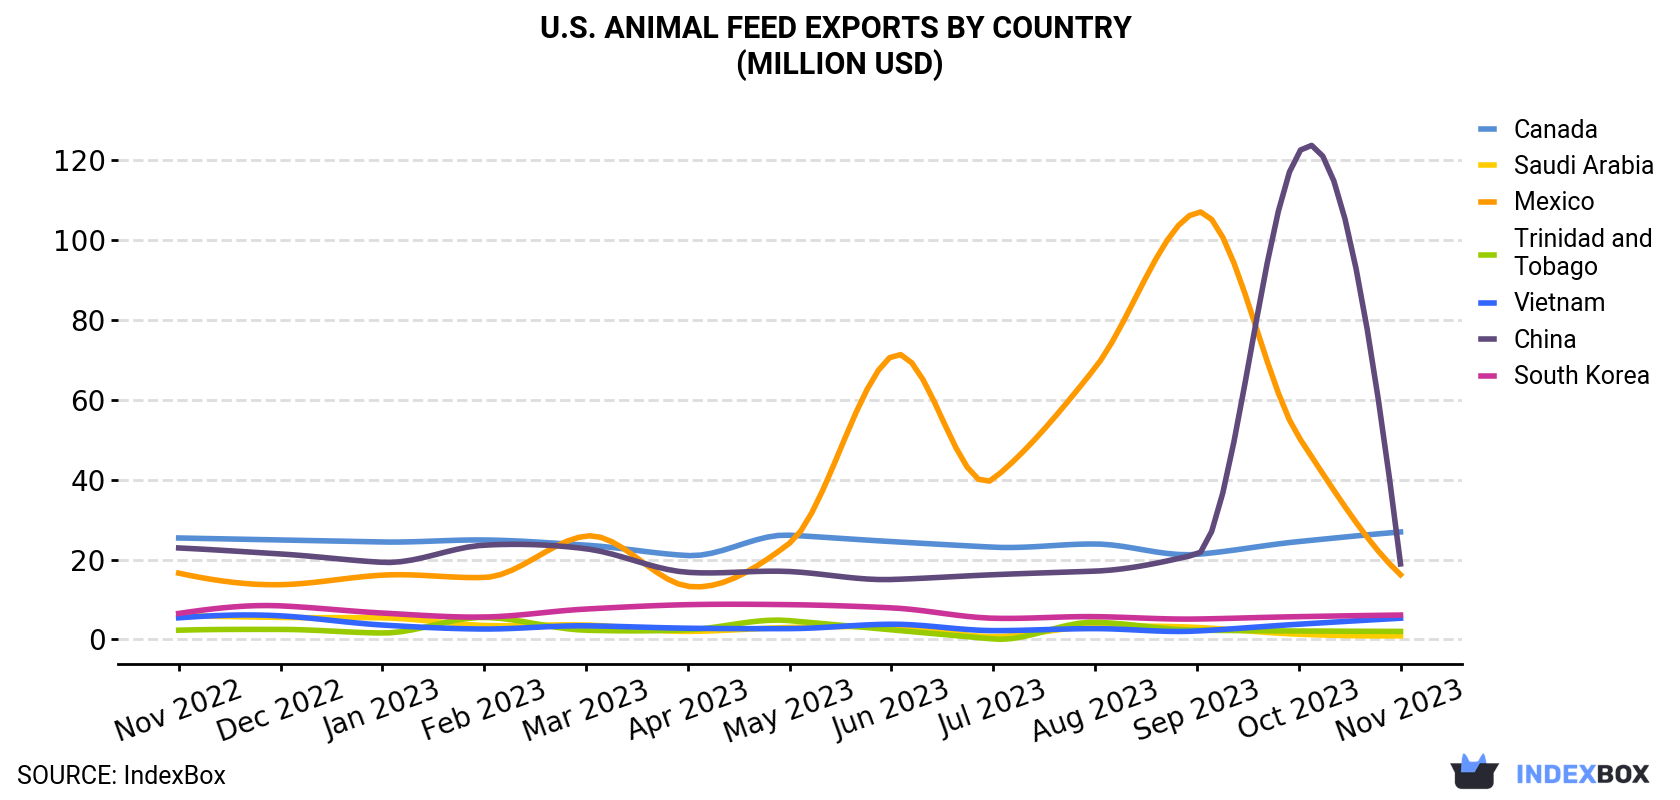 U.S. Animal Feed Exports By Country (Million USD)